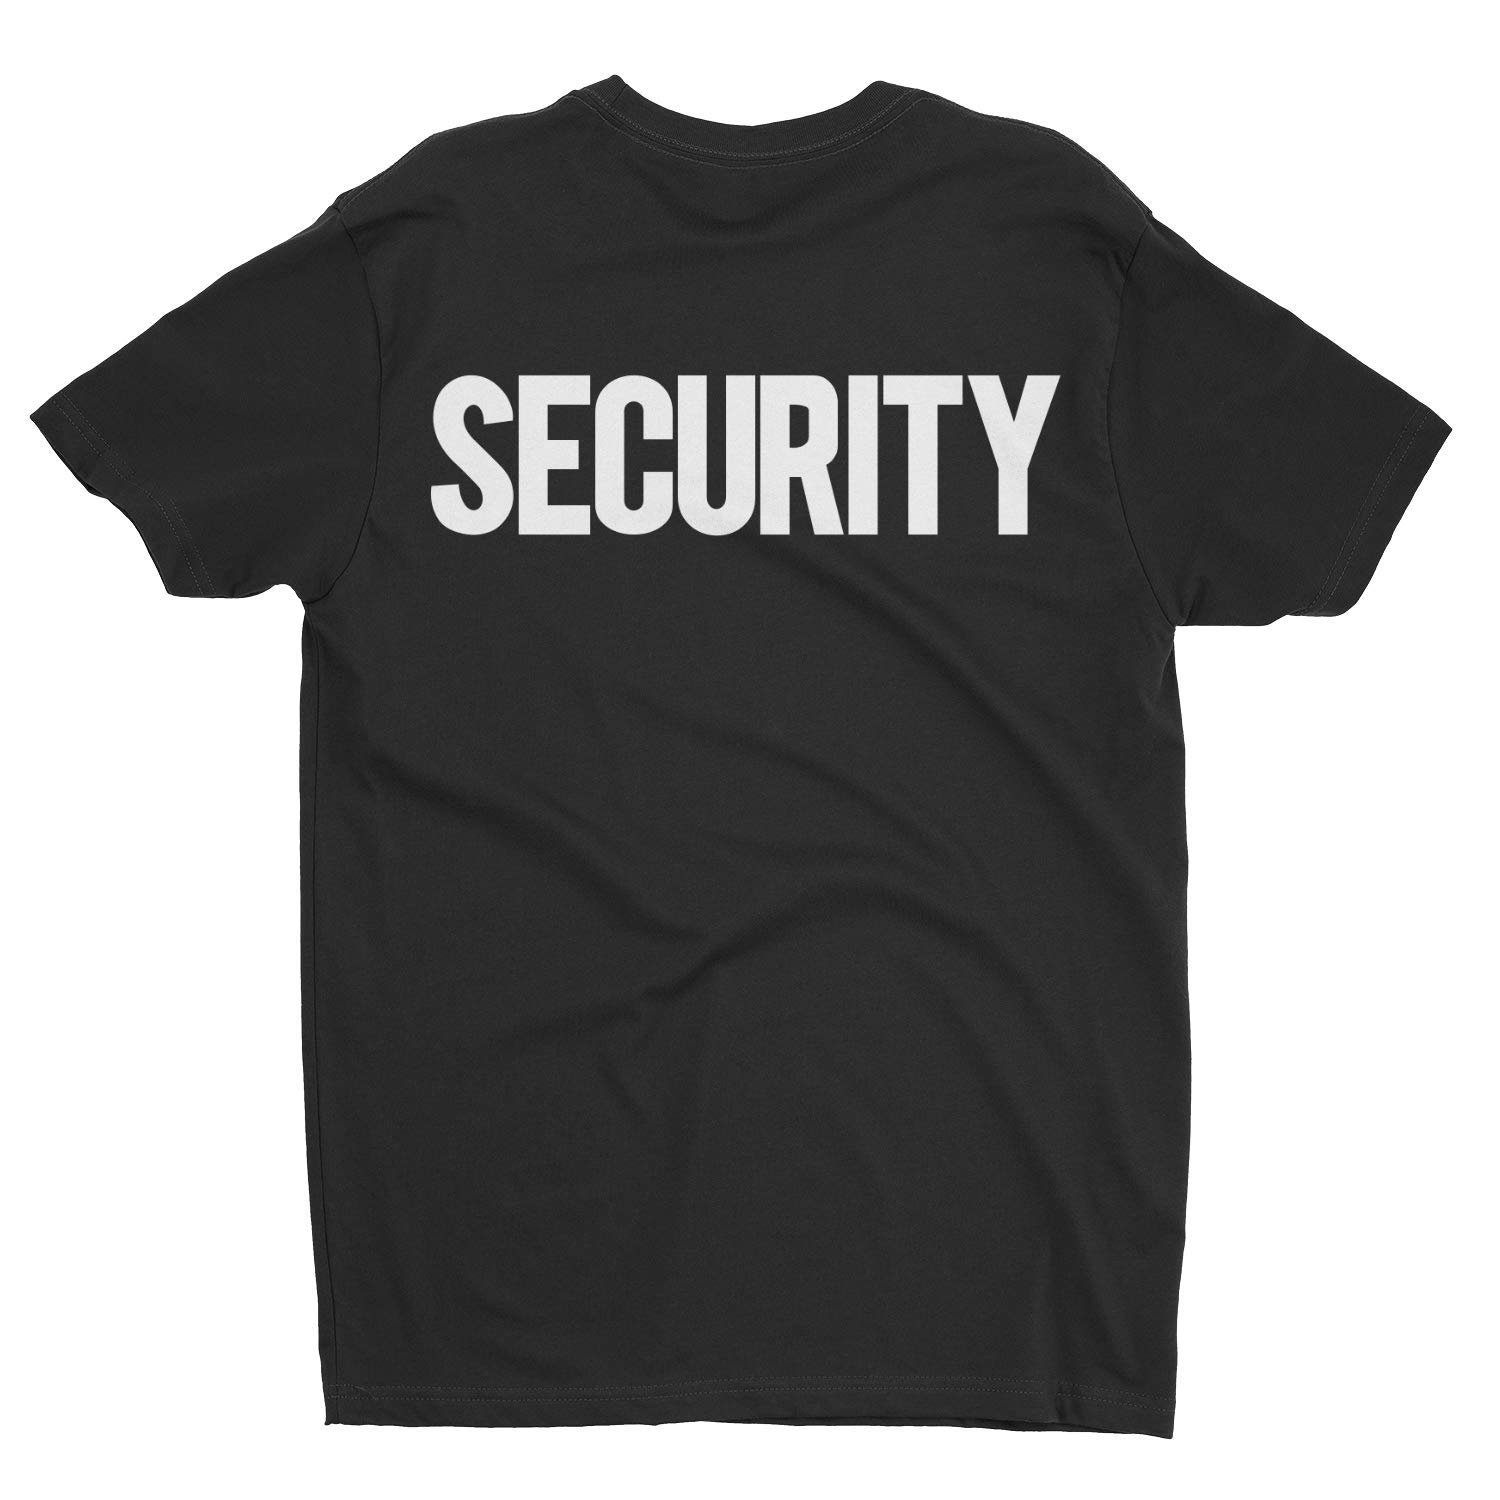 NYC Factory Men's Neon Security T-Shirt Chest Back Print Tee